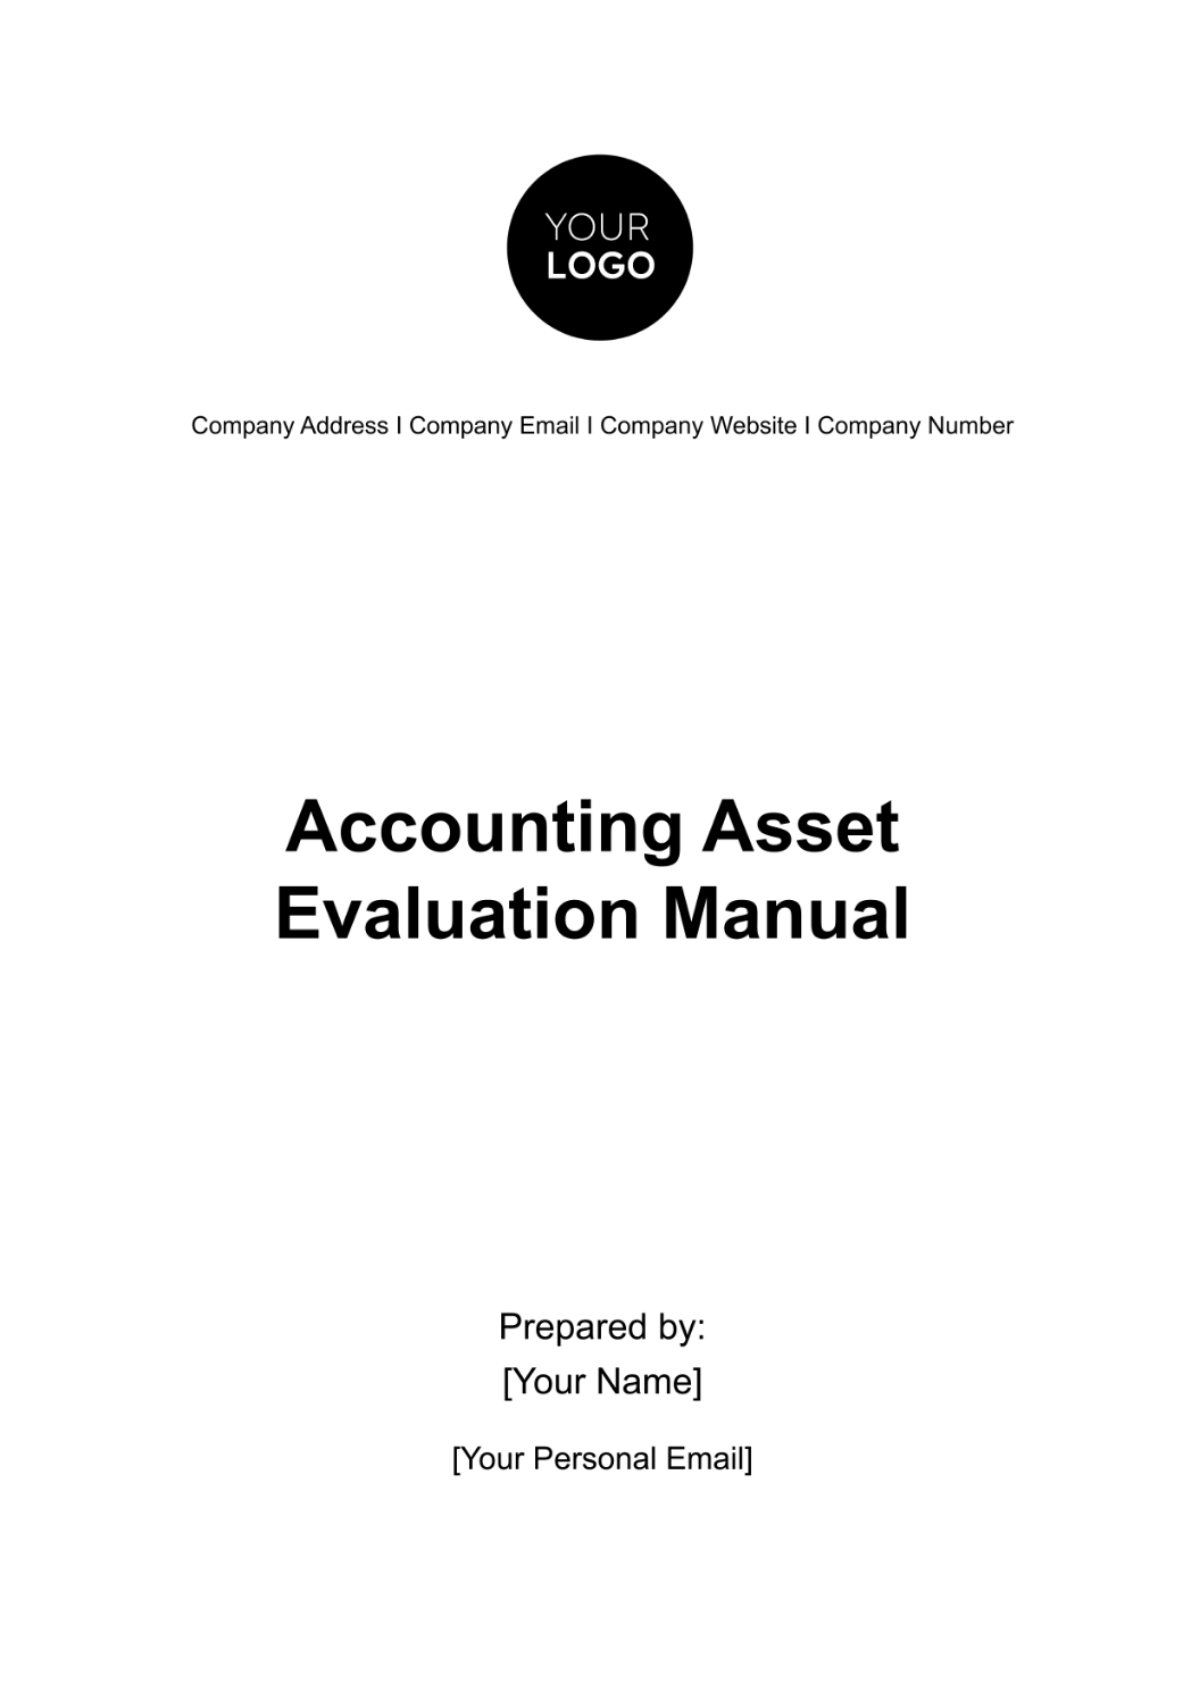 Free Accounting Asset Evaluation Manual Template